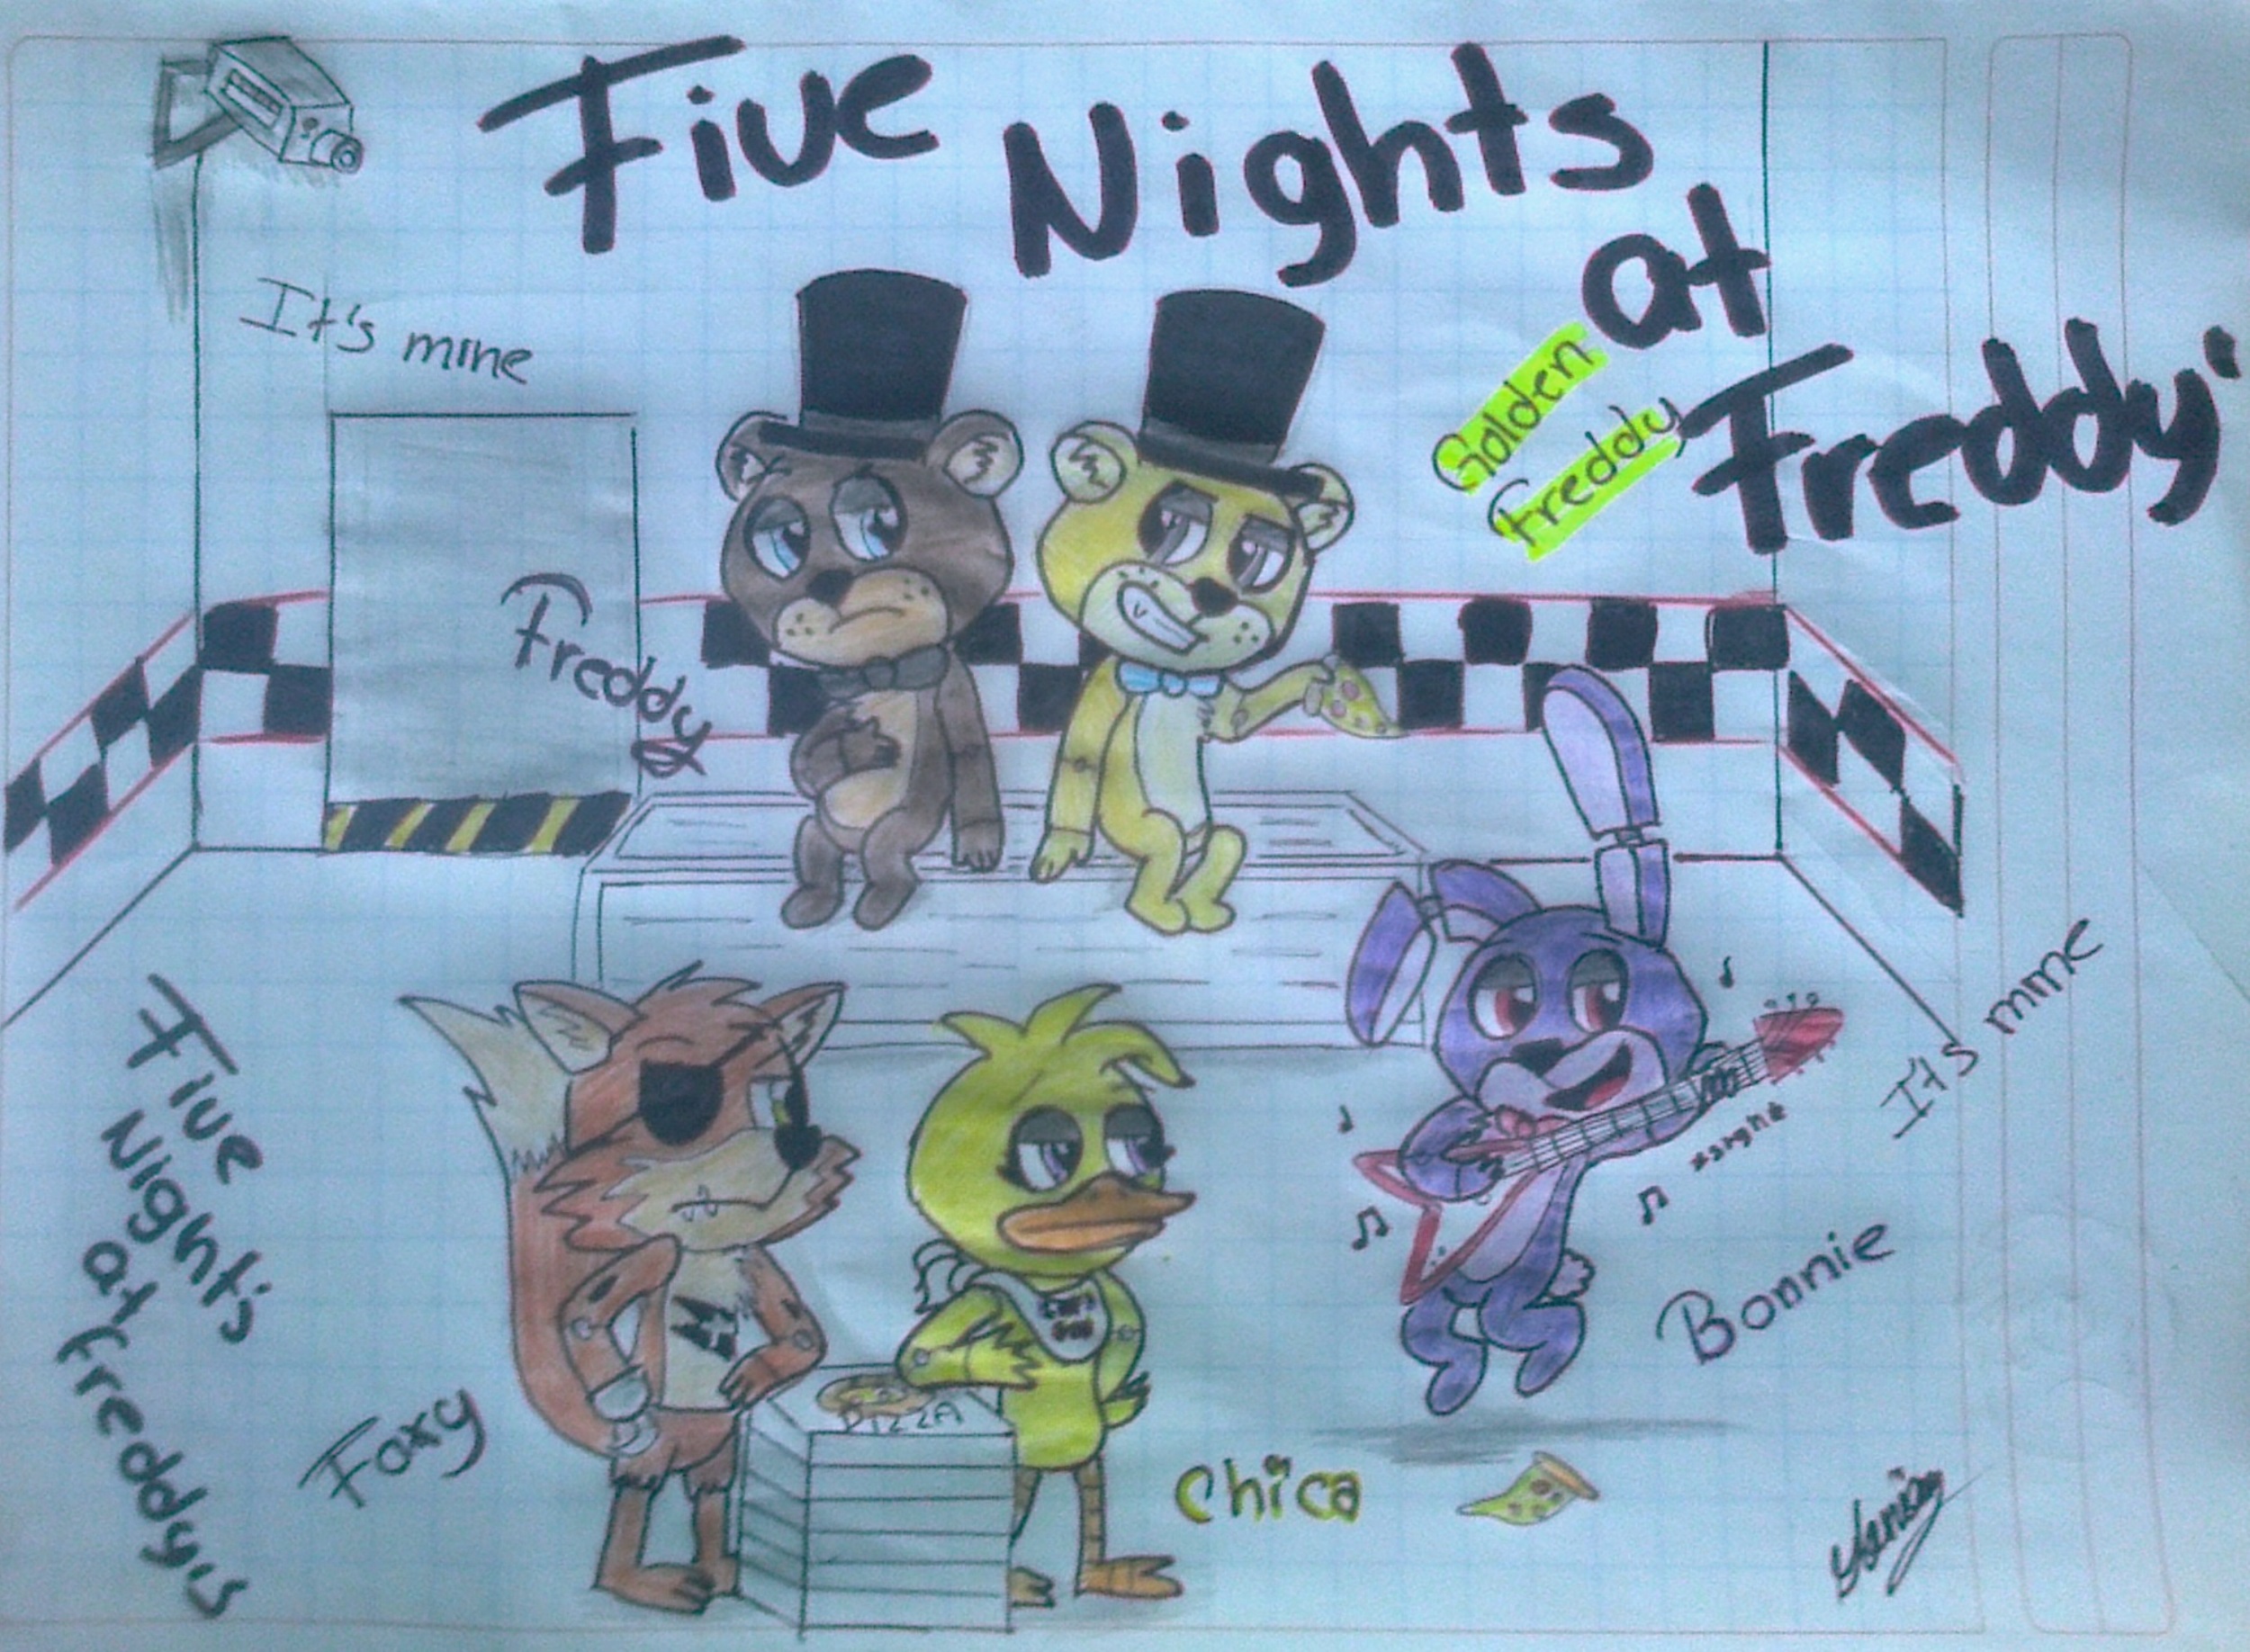 FIVE NIGHTS AT FREDDY'S (hand drawing) by gloriapainthtf on DeviantArt